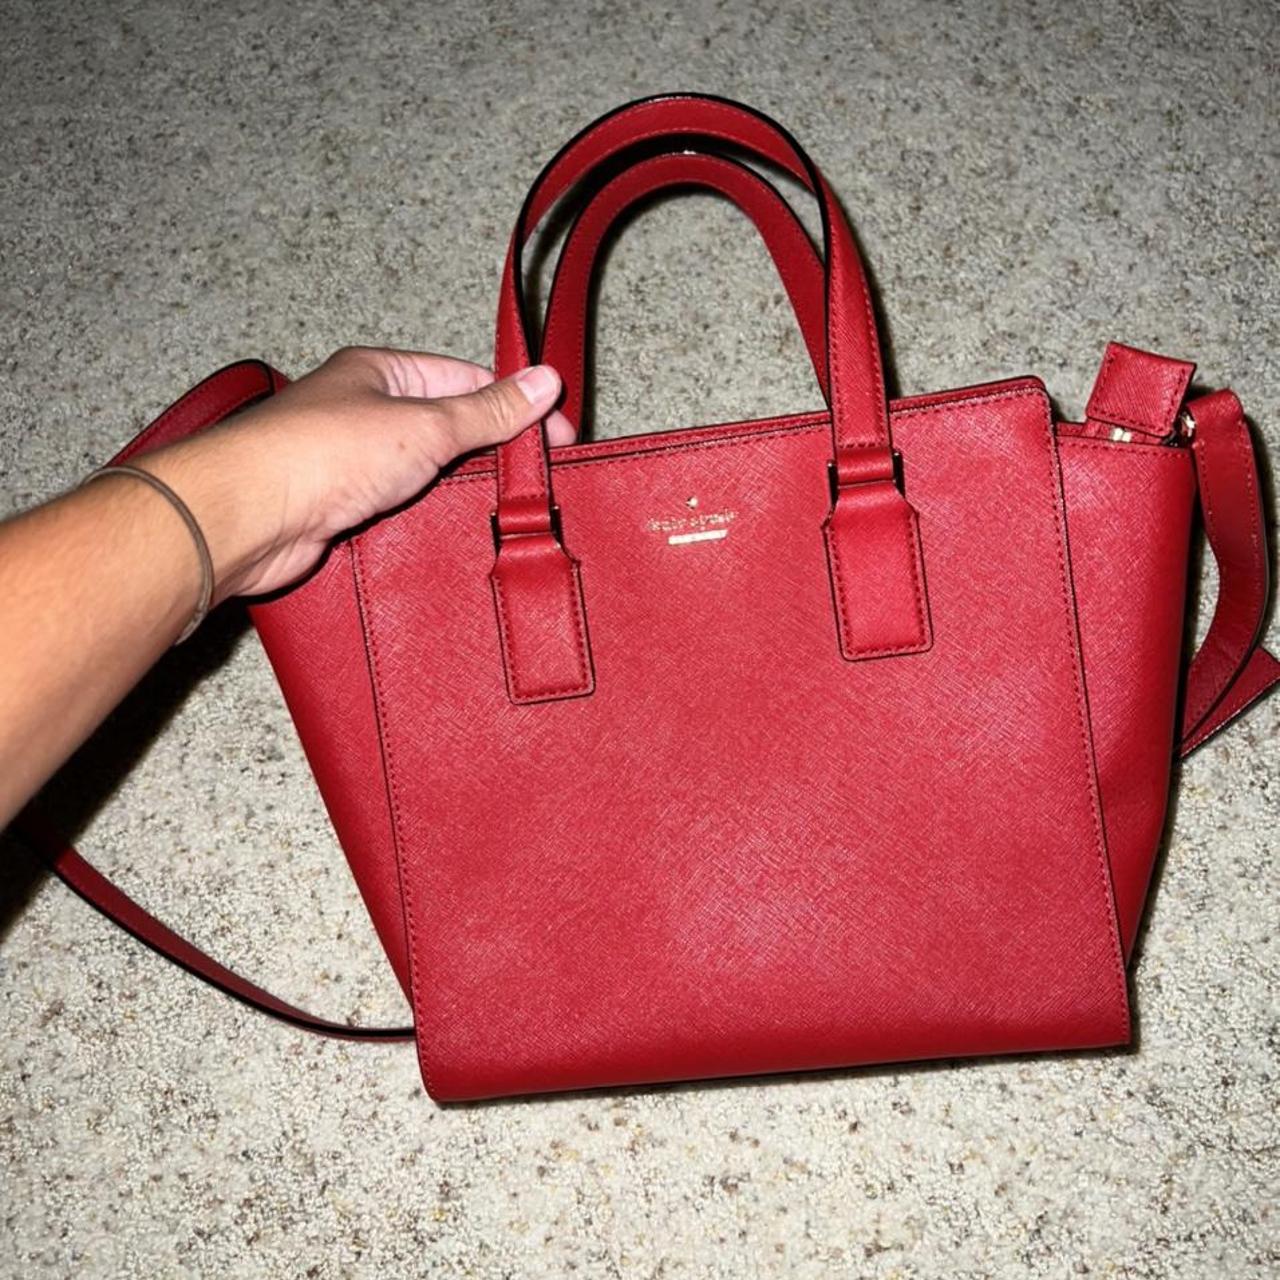 NWOT Kate Spade Red Leather Crossbody Bag